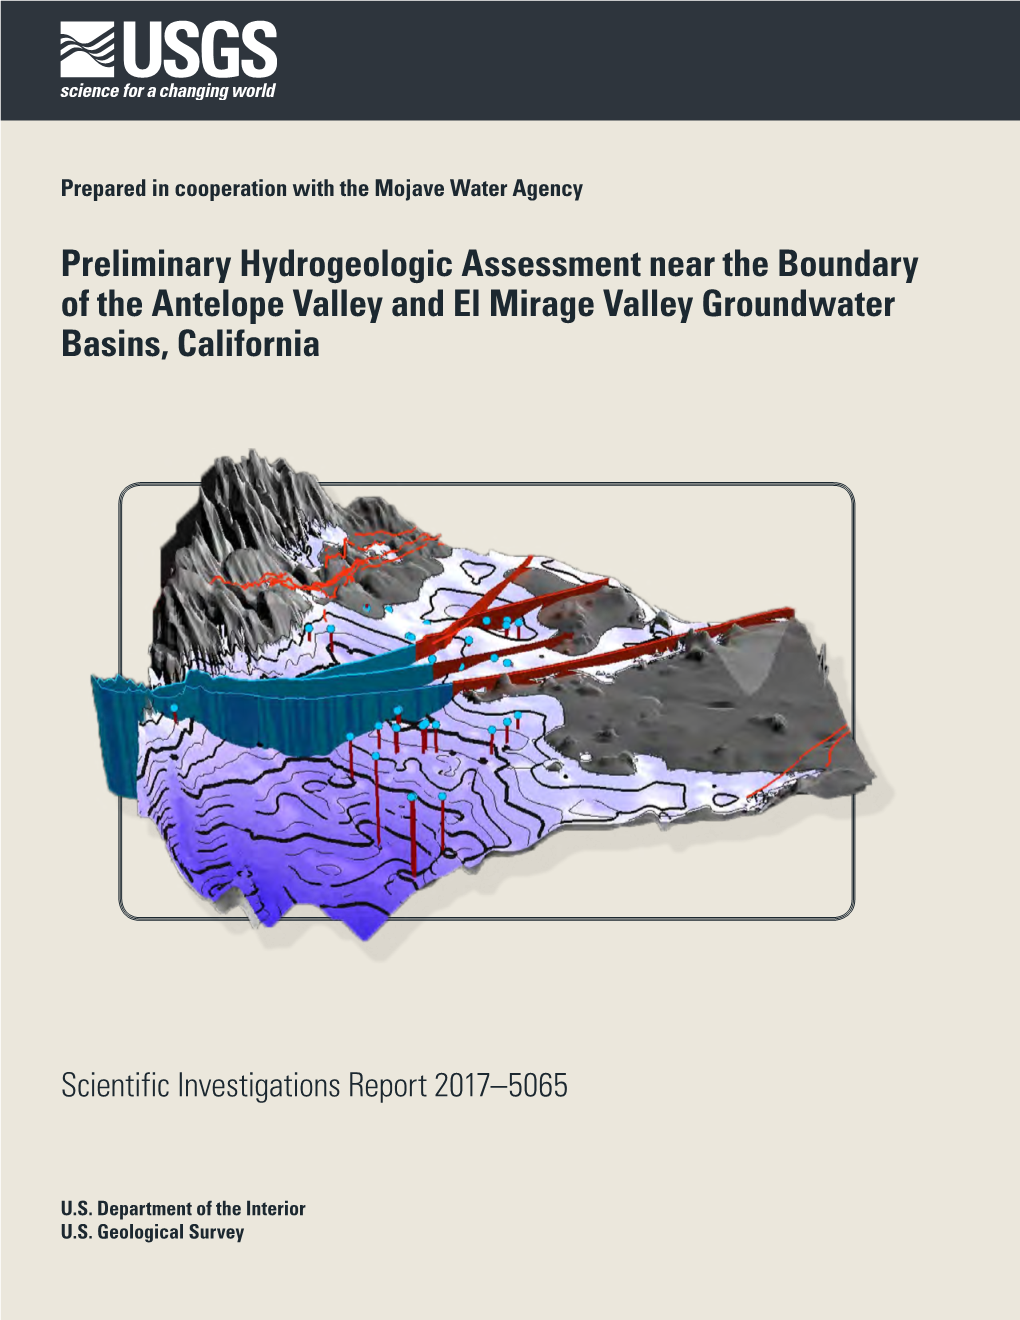 Preliminary Hydrogeologic Assessment Near the Boundary of the Antelope Valley and El Mirage Valley Groundwater Basins, California